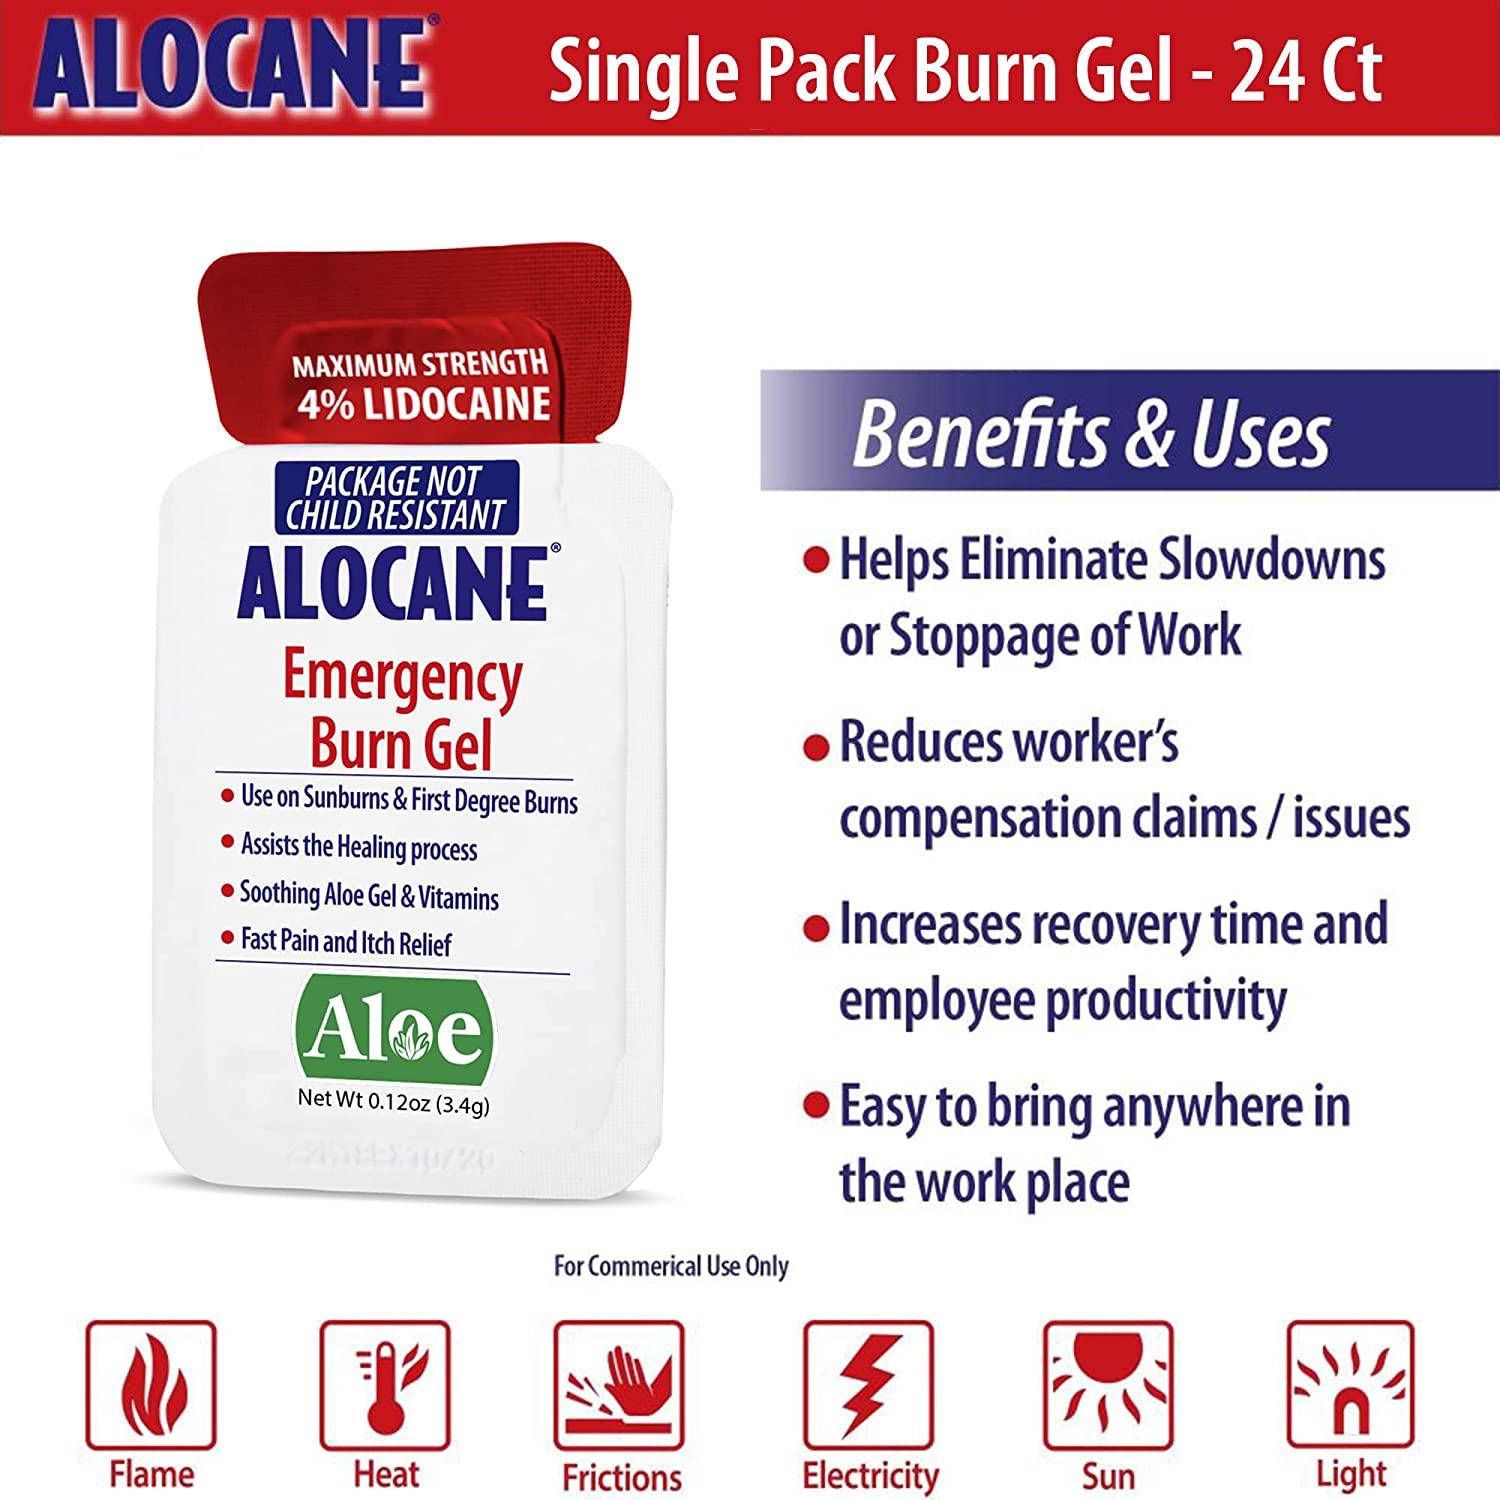 BUY Lidocaine Hydrochloride (Alocane Emergency Burn) 4 g/100mL from GNH  India at the best price available.